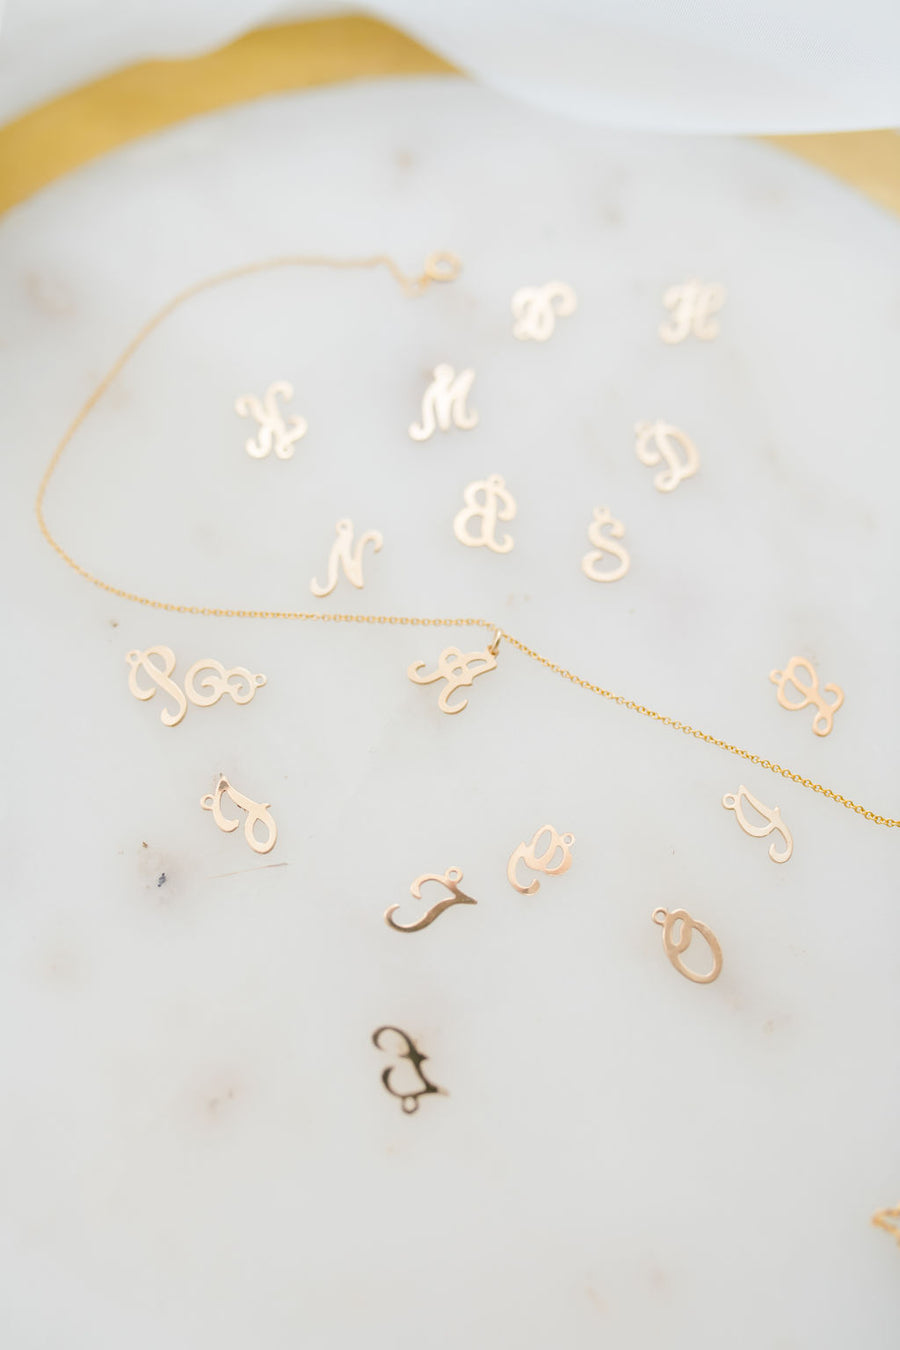 Initial necklace in cursive